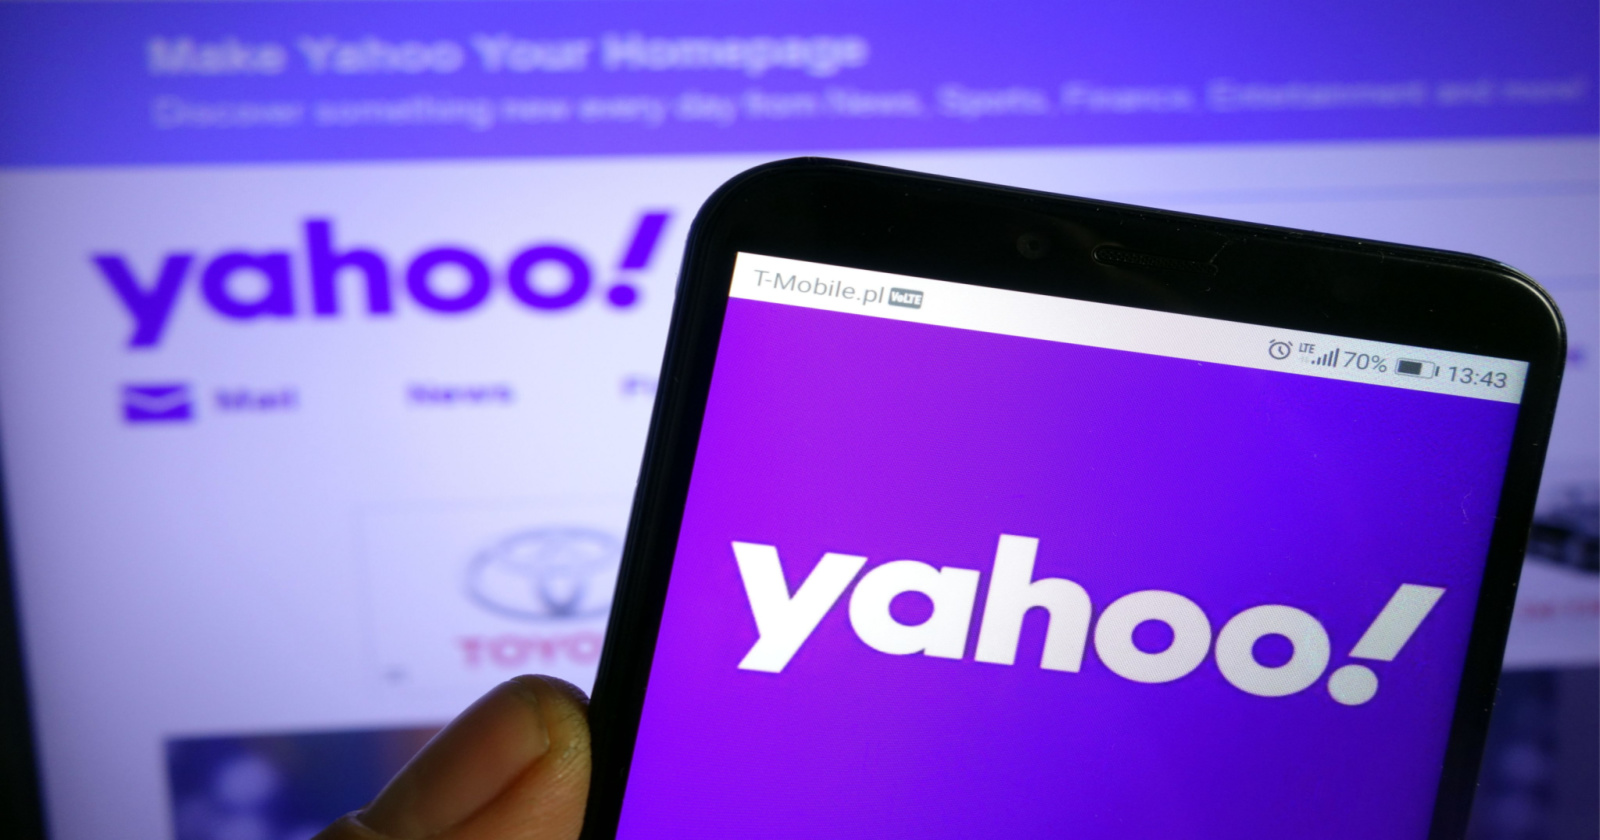 Yahoo Acquires Source Credibility Algorithms With Latest Acquisition